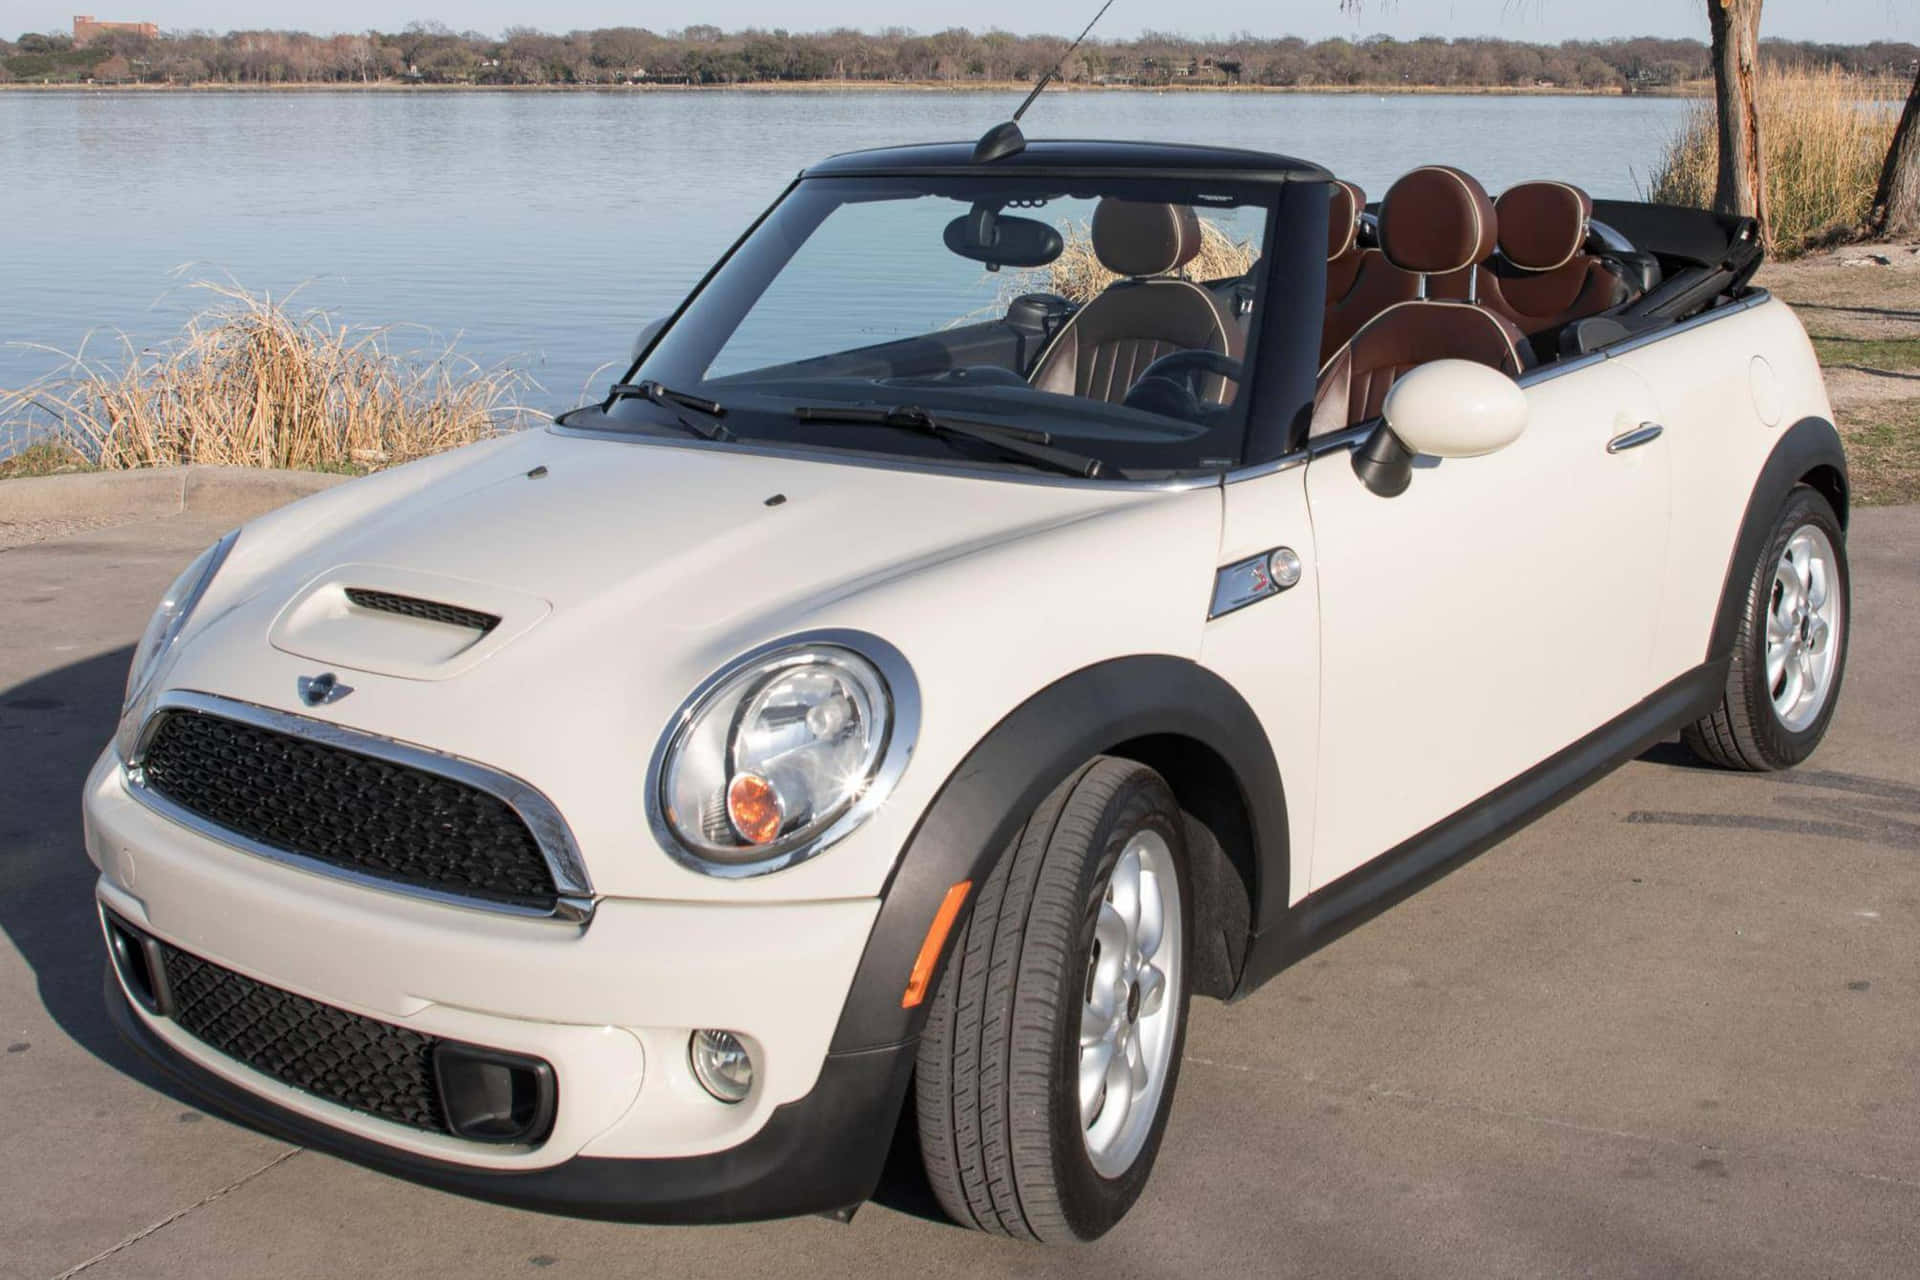 Sporty Mini Cooper Convertible cruising on the open road Wallpaper